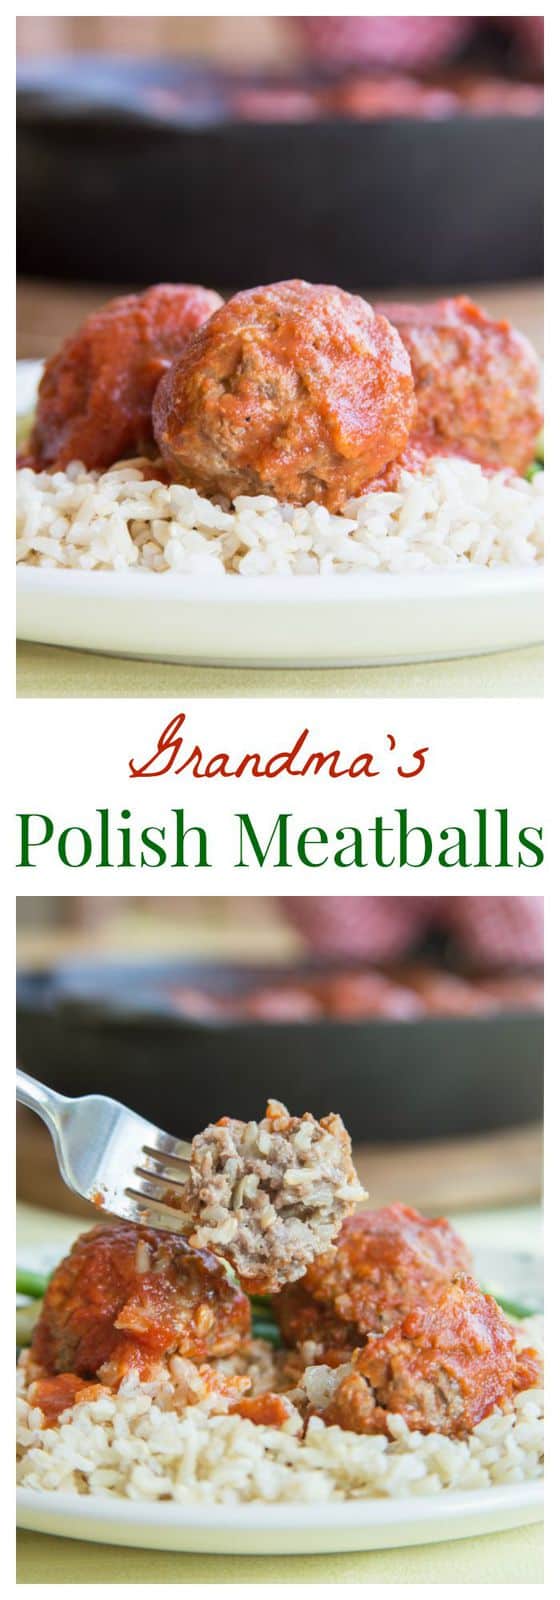 Grandma's Polish Meatballs (aka "Porcupine Meatballs") - whenever my grandma made her traditional stuffed cabbage, she would take some of the savory meat filling and make these for me for Sunday supper. | cupcakesandkalechips.com | gluten free recipe